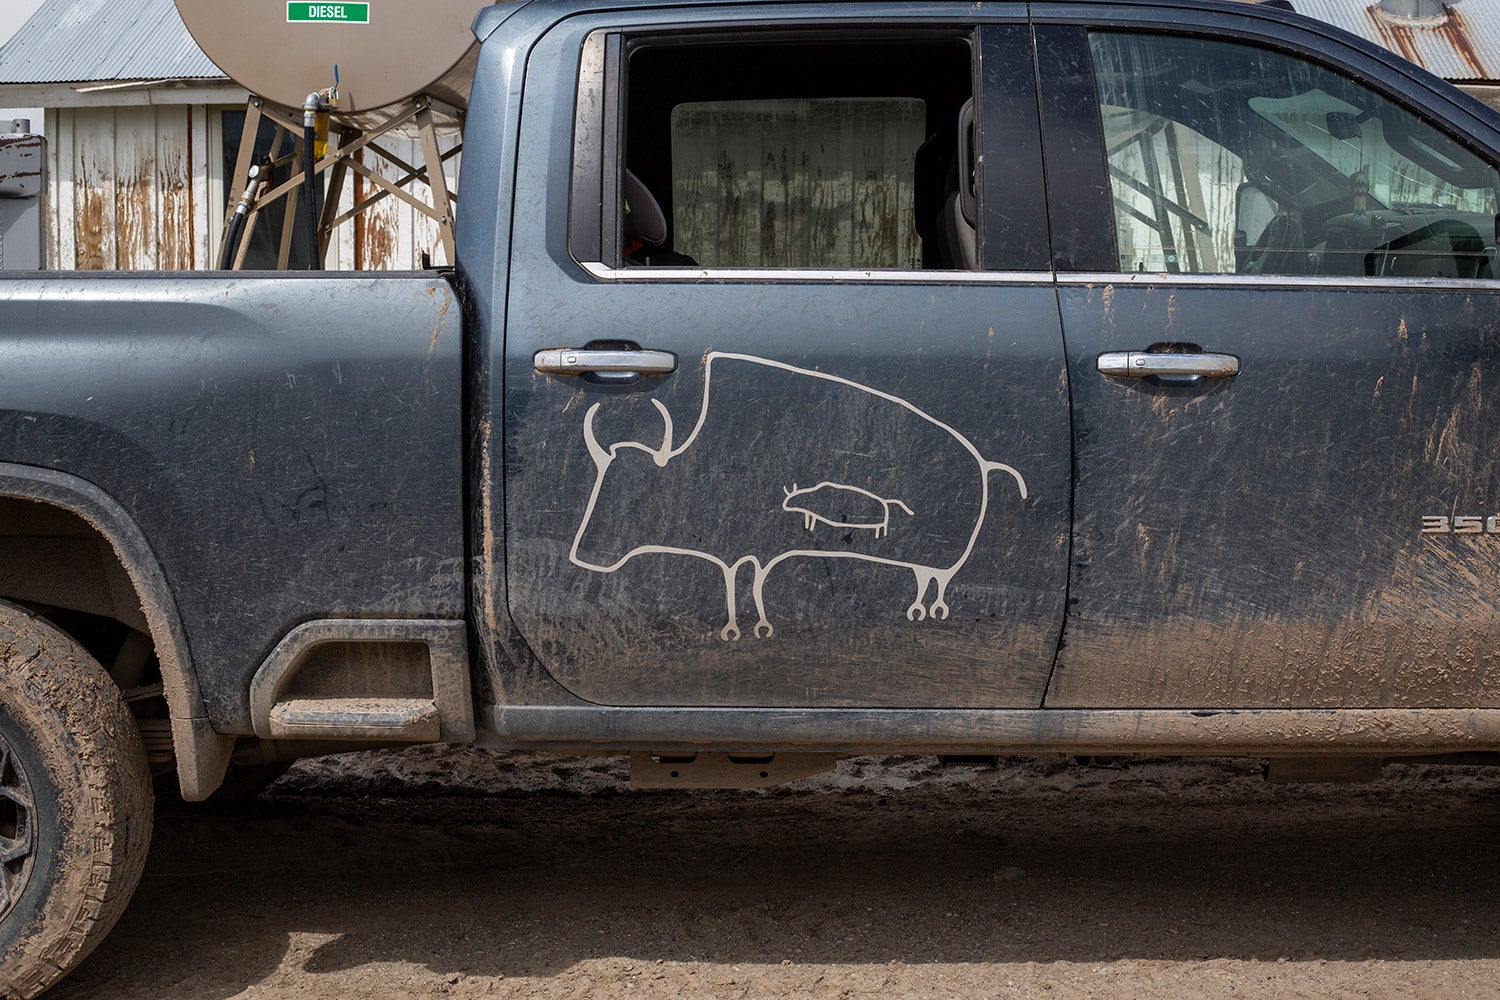 cave-style drawing of buffalo on door of pickup truck